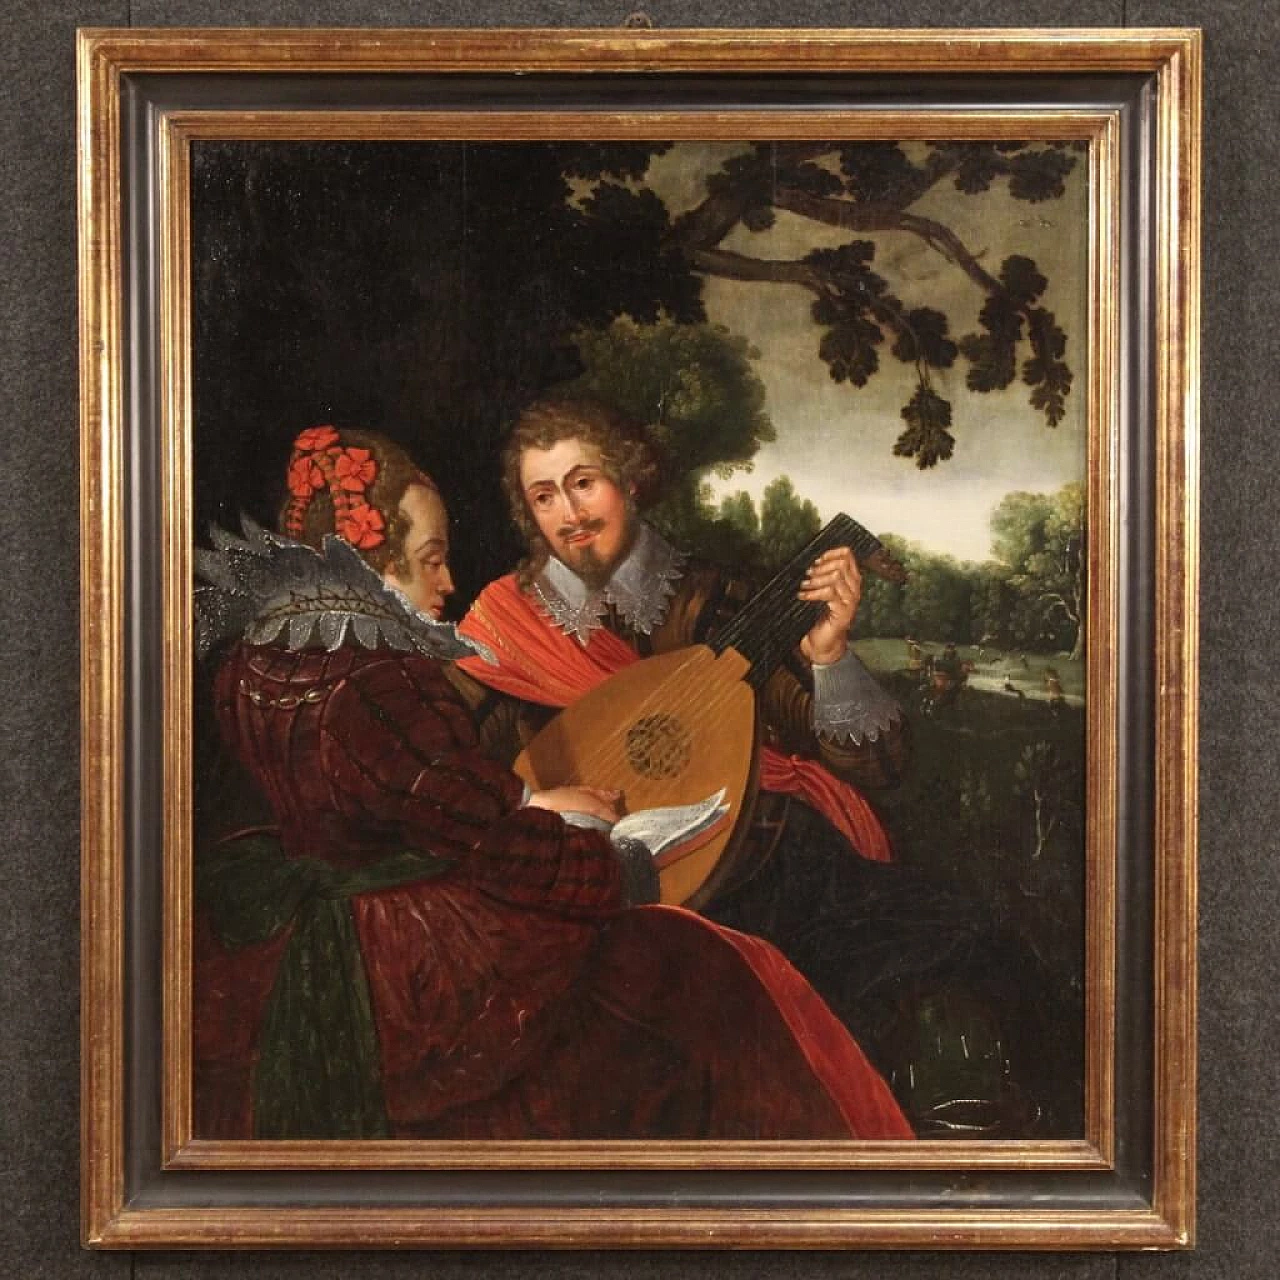 Musicians and hunting scene, Flemish oil painting, 17th century 1404012